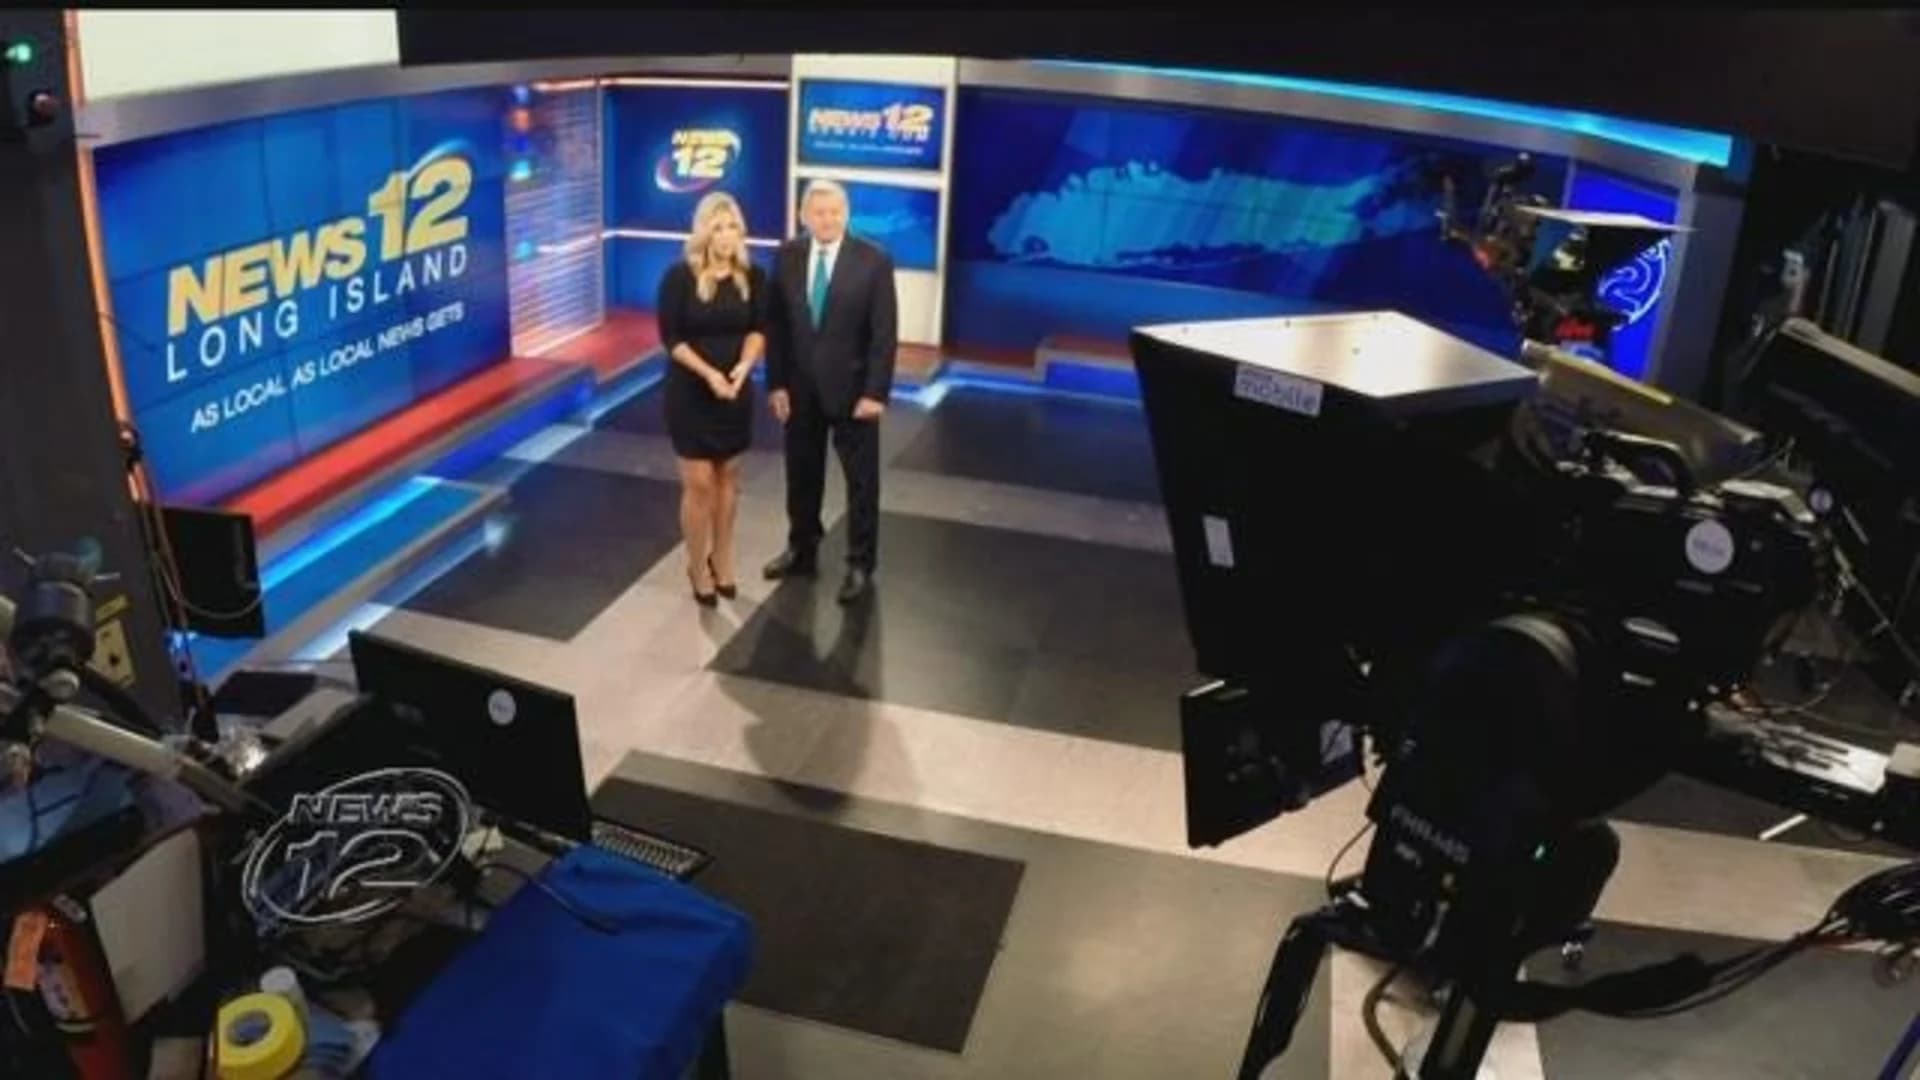 We want to hear from you! Tell us what you think about News 12